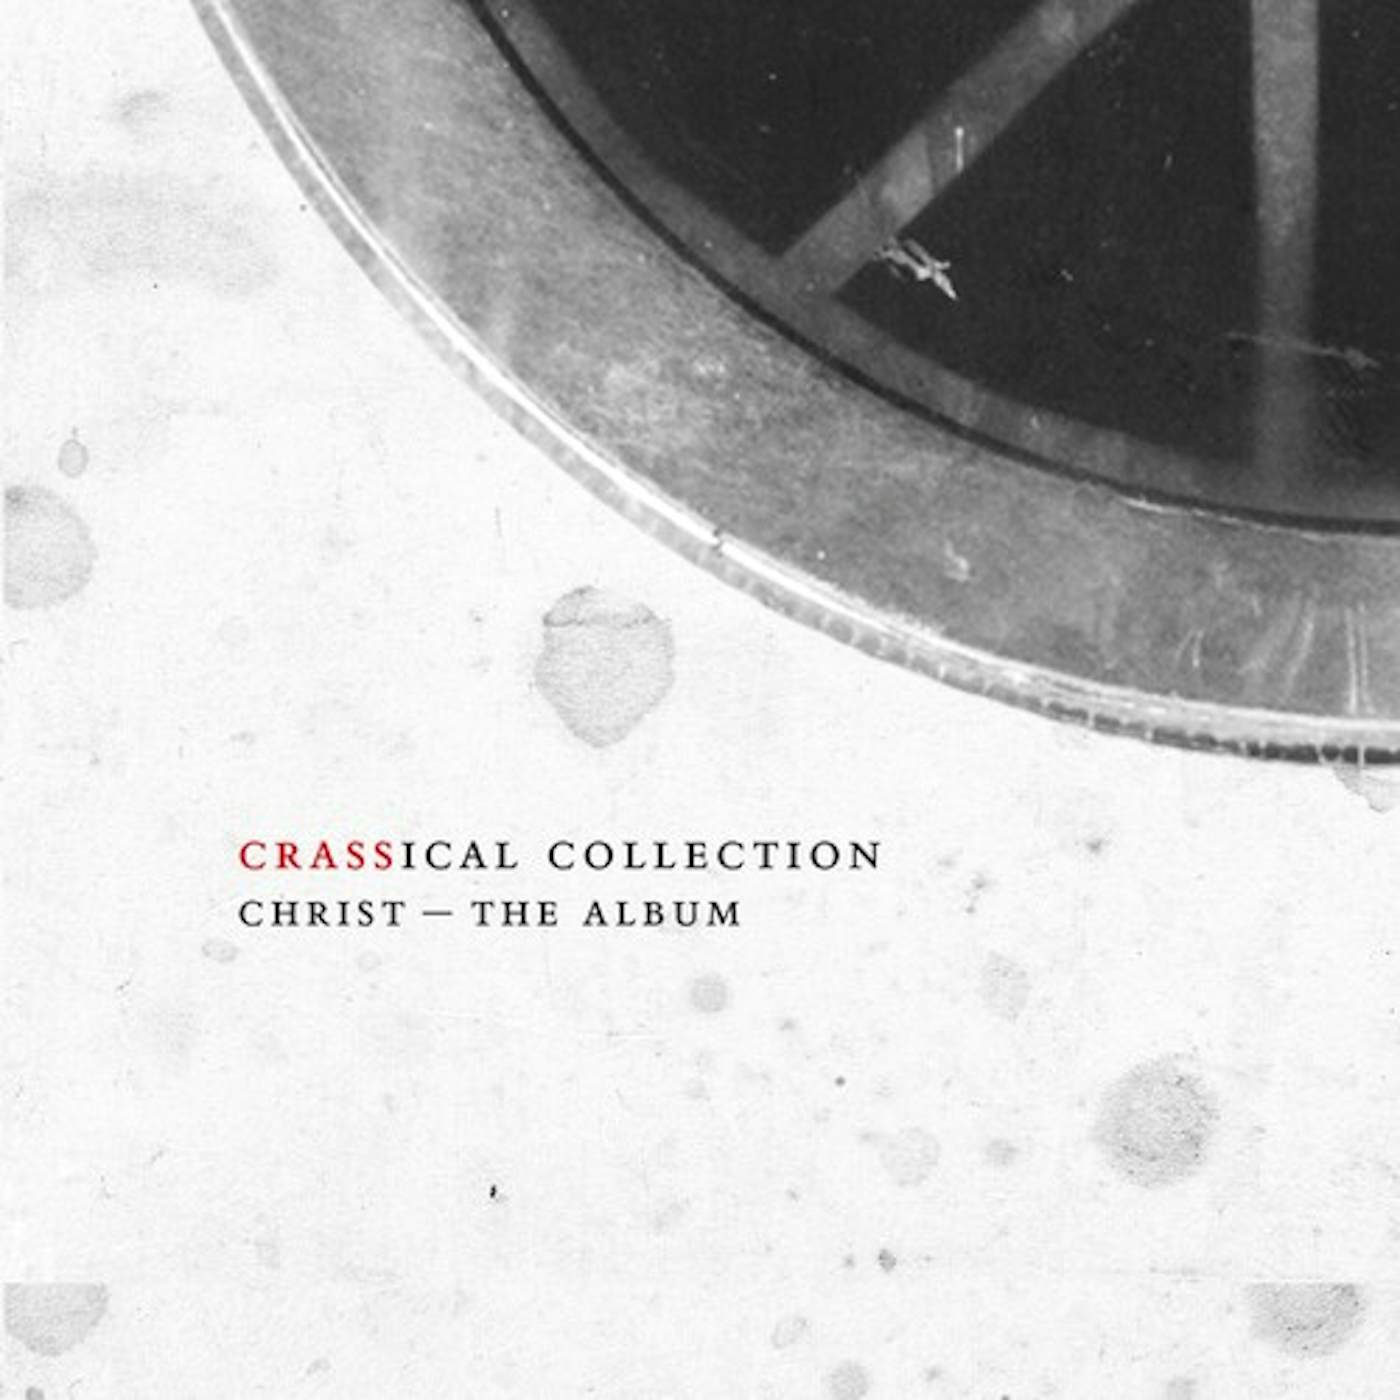 CHRIST THE ALBUM (CRASSICAL COLLECTION) CD